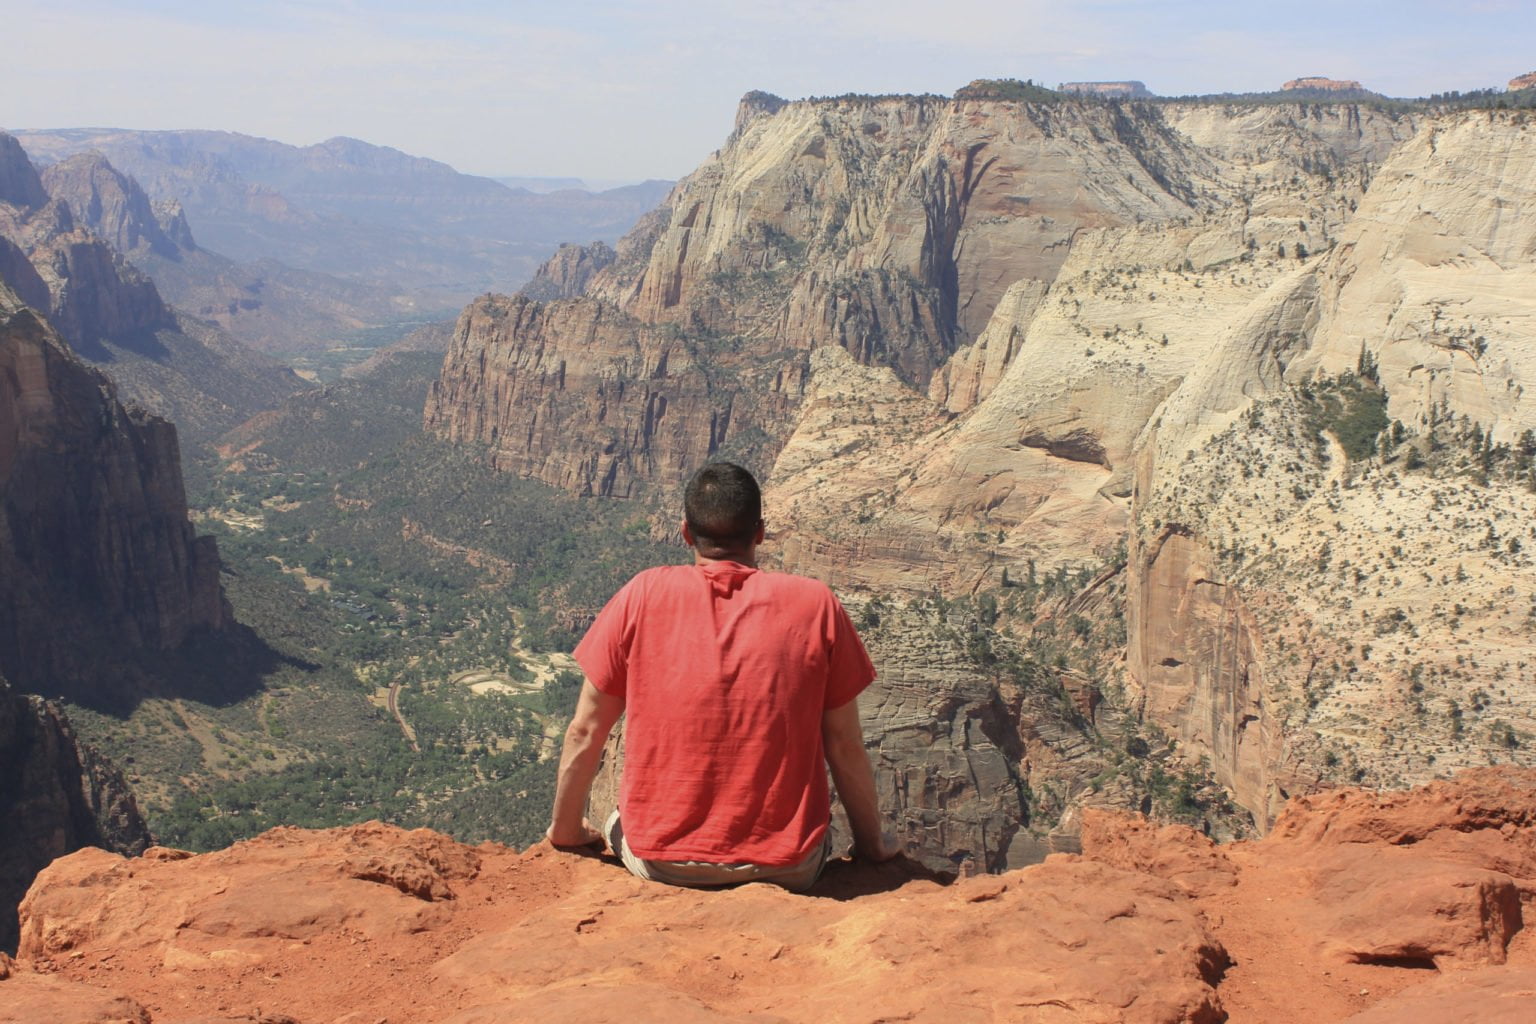 Man from behind at the top of observation point in Zion National park